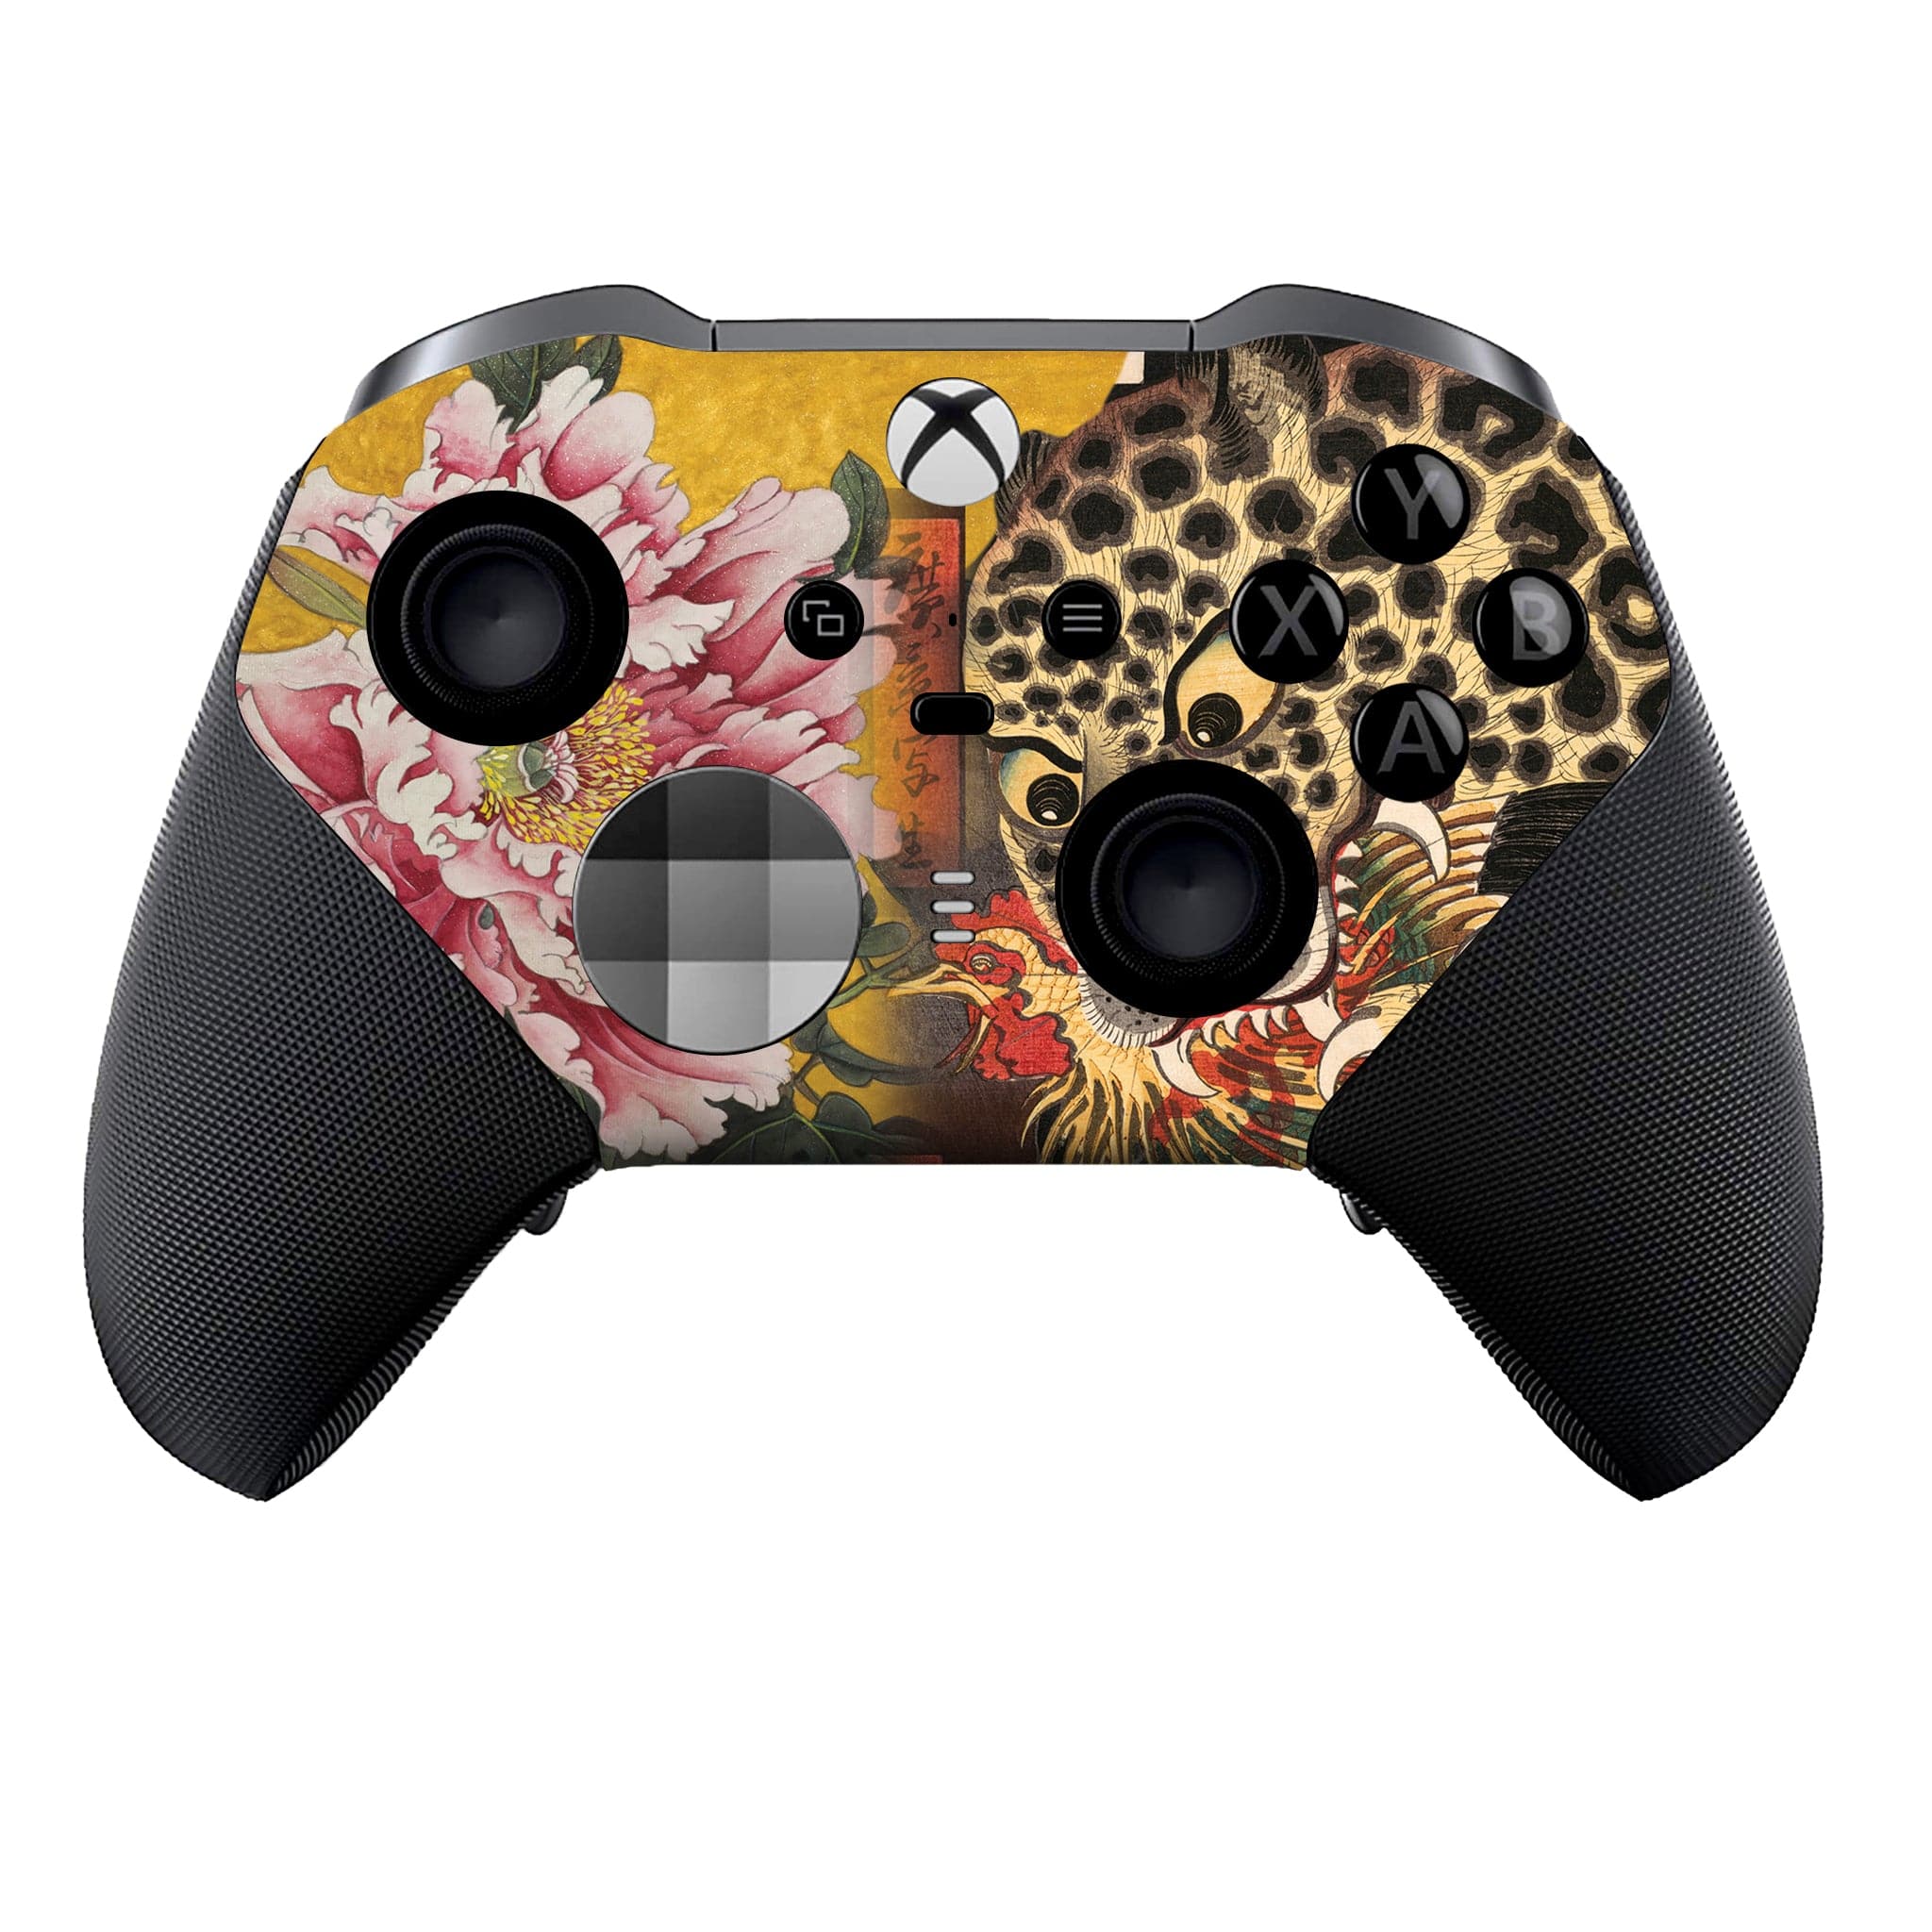 Chinese Leopard Xbox Elite Series 2 Controller - Dream Controller